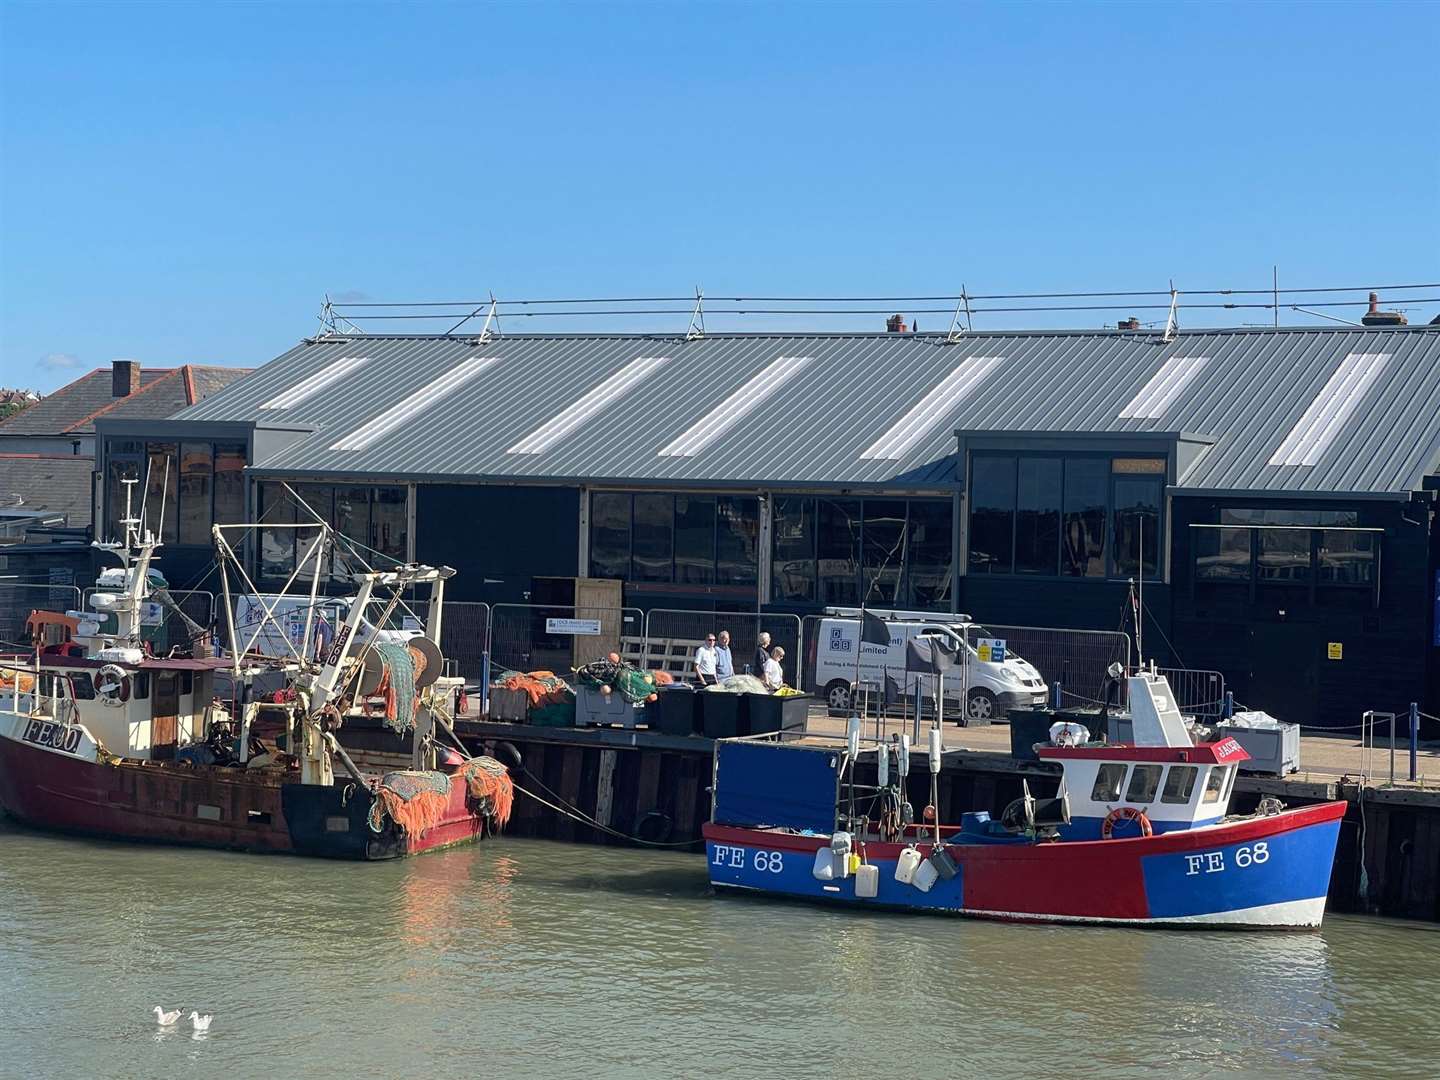 The South Quay Shed in Whitstable has been transformed. Picture: Canterbury City Council